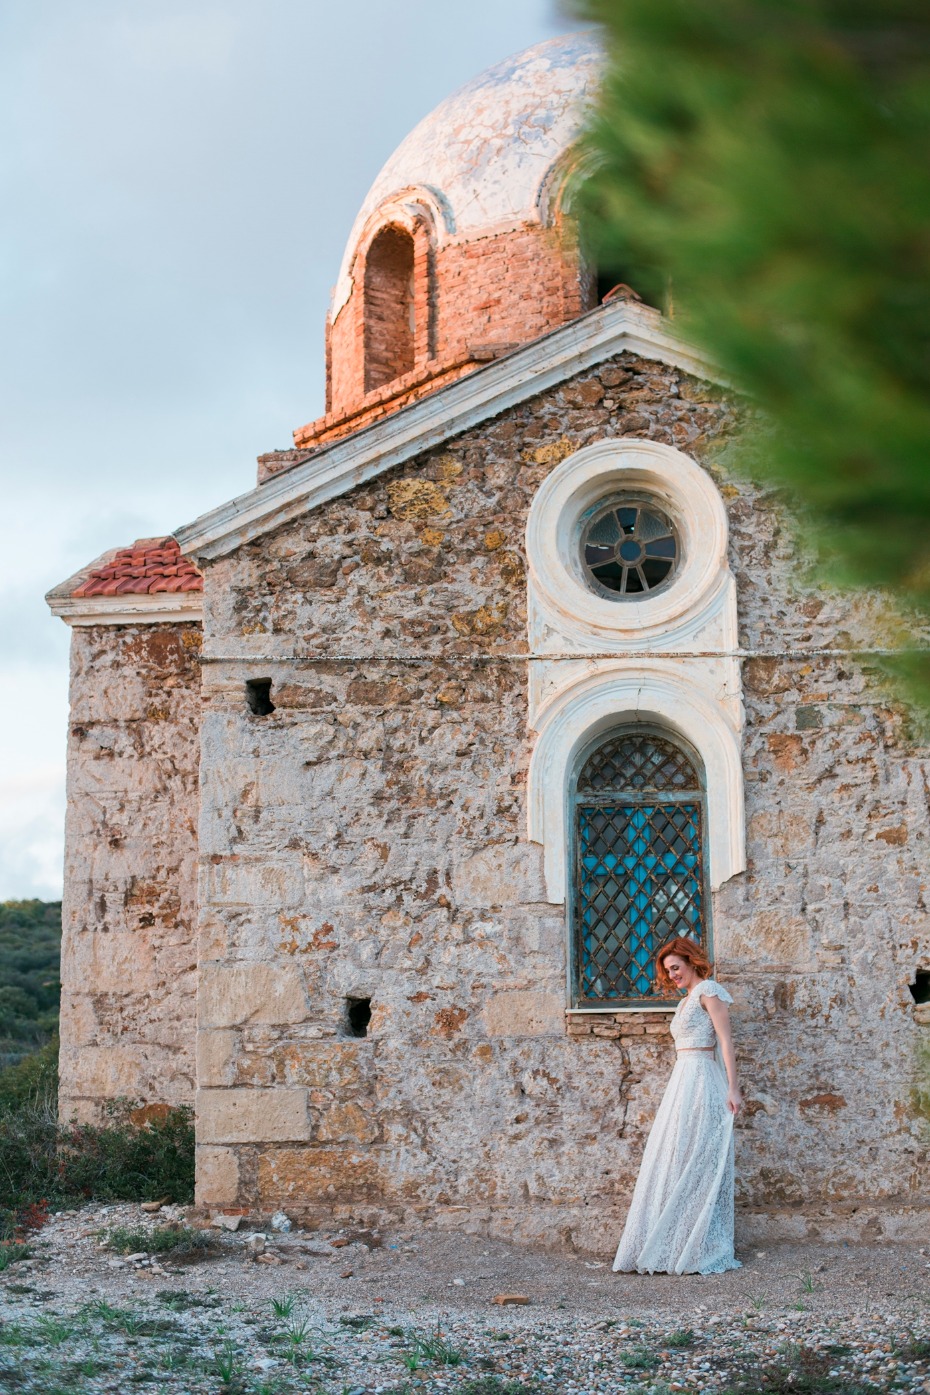 Gorgeous wedding inspiration from Greece